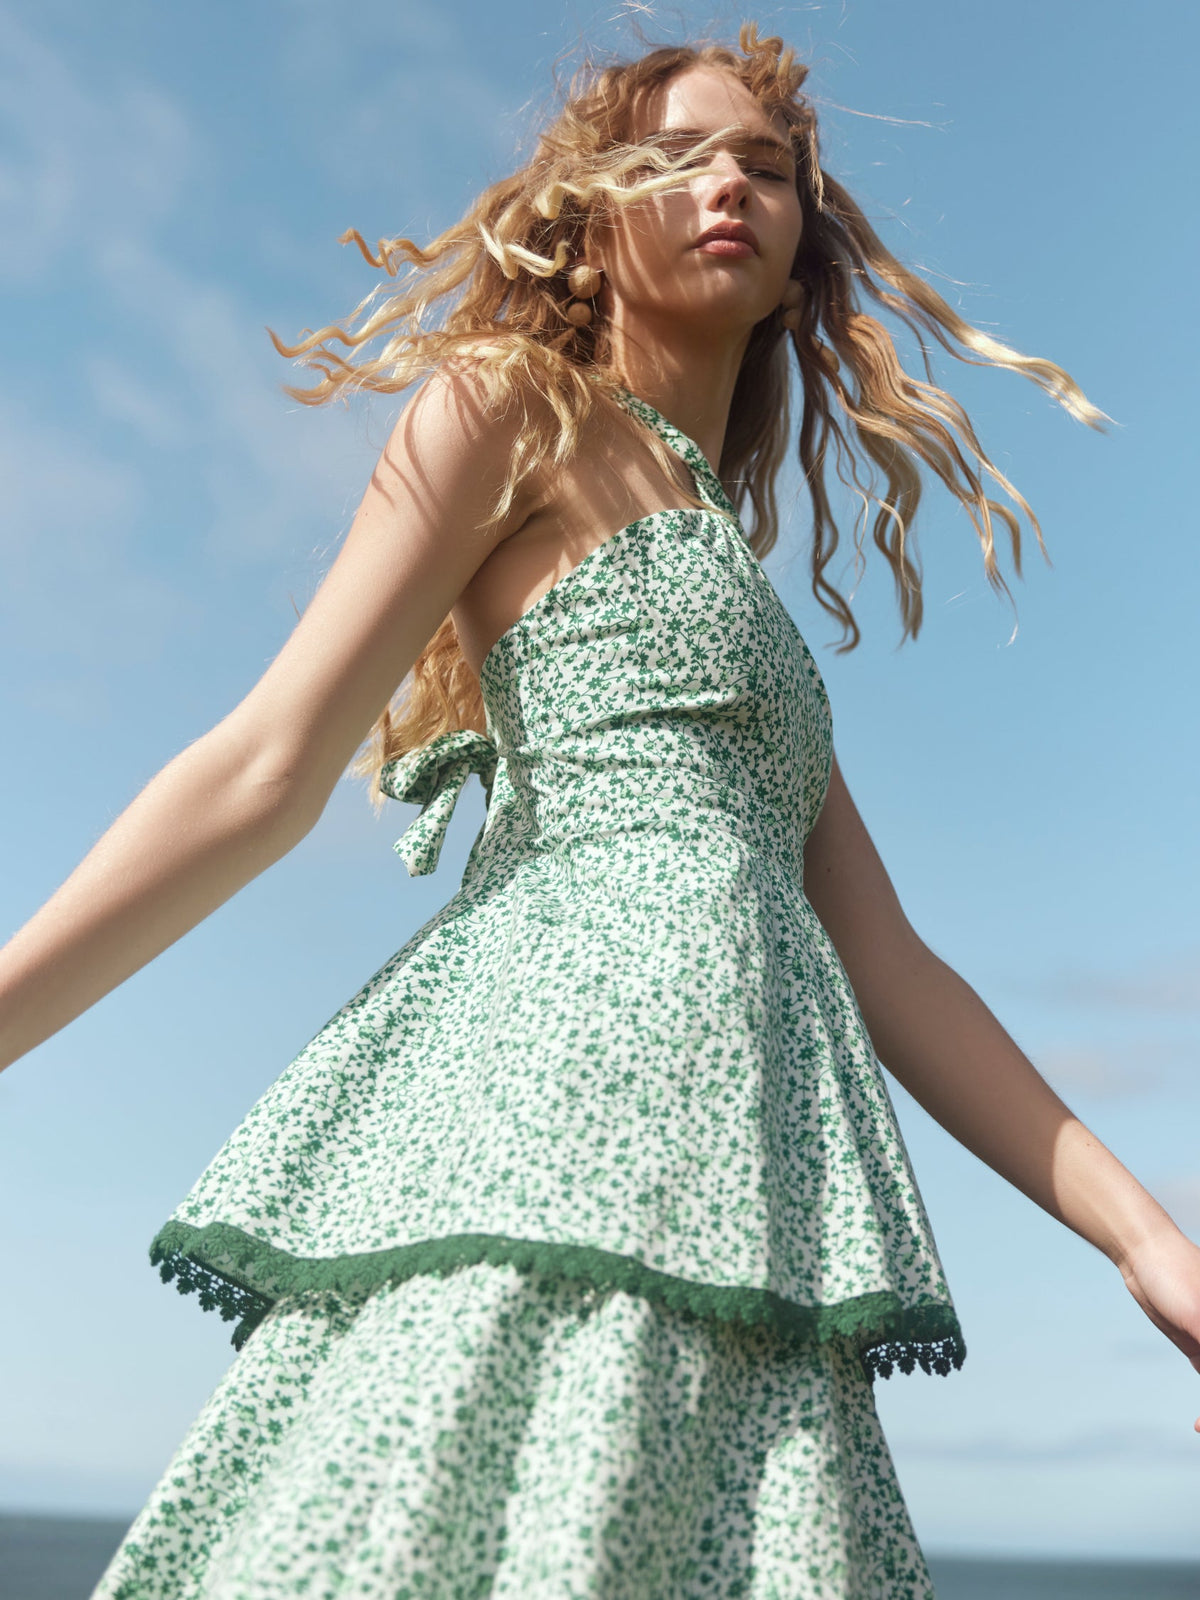 Emma Tiered Dress in Ivory/Grassy Knoll Ditsy Floral